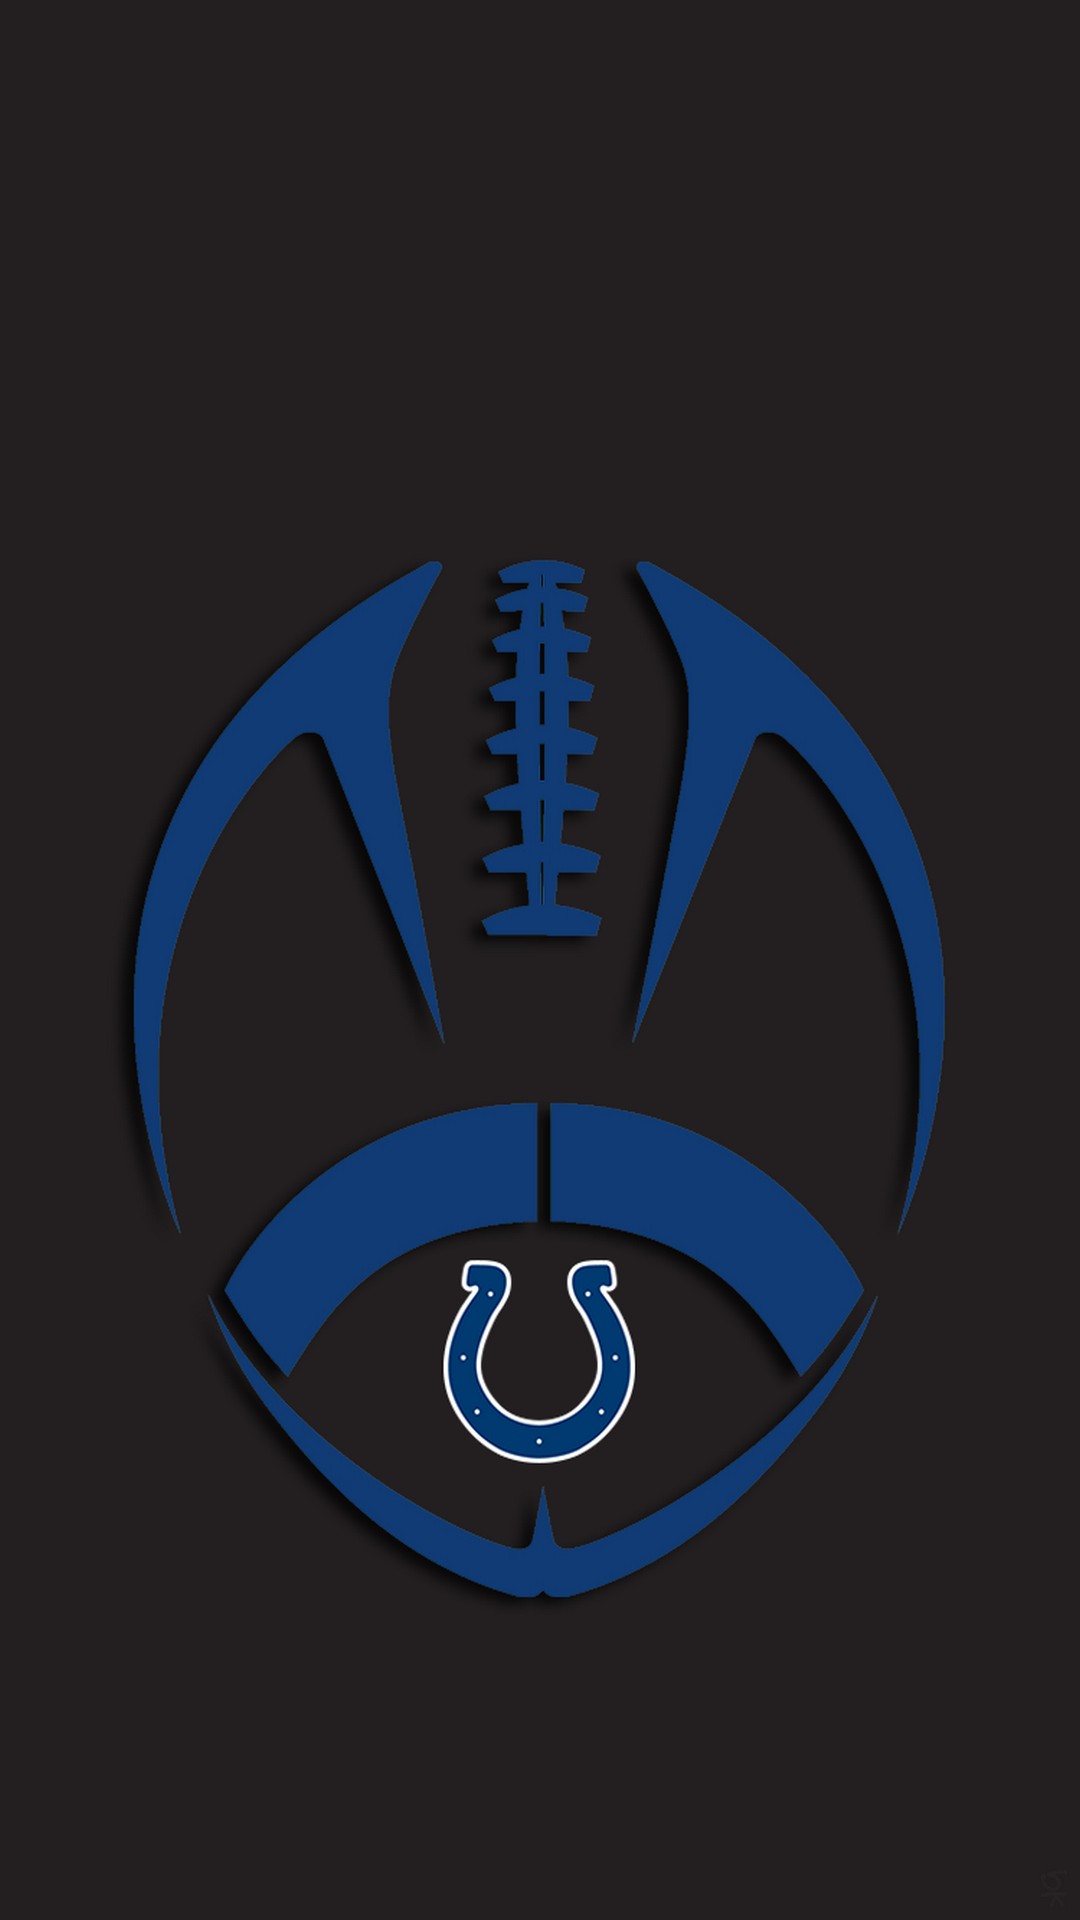 Indianapolis Colts iPhone Wallpaper Size With high-resolution 1080X1920 pixel. Donwload and set as wallpaper for your iPhone X, iPhone XS home screen backgrounds, XS Max, XR, iPhone8 lock screen wallpaper, iPhone 7, 6, SE, and other mobile devices